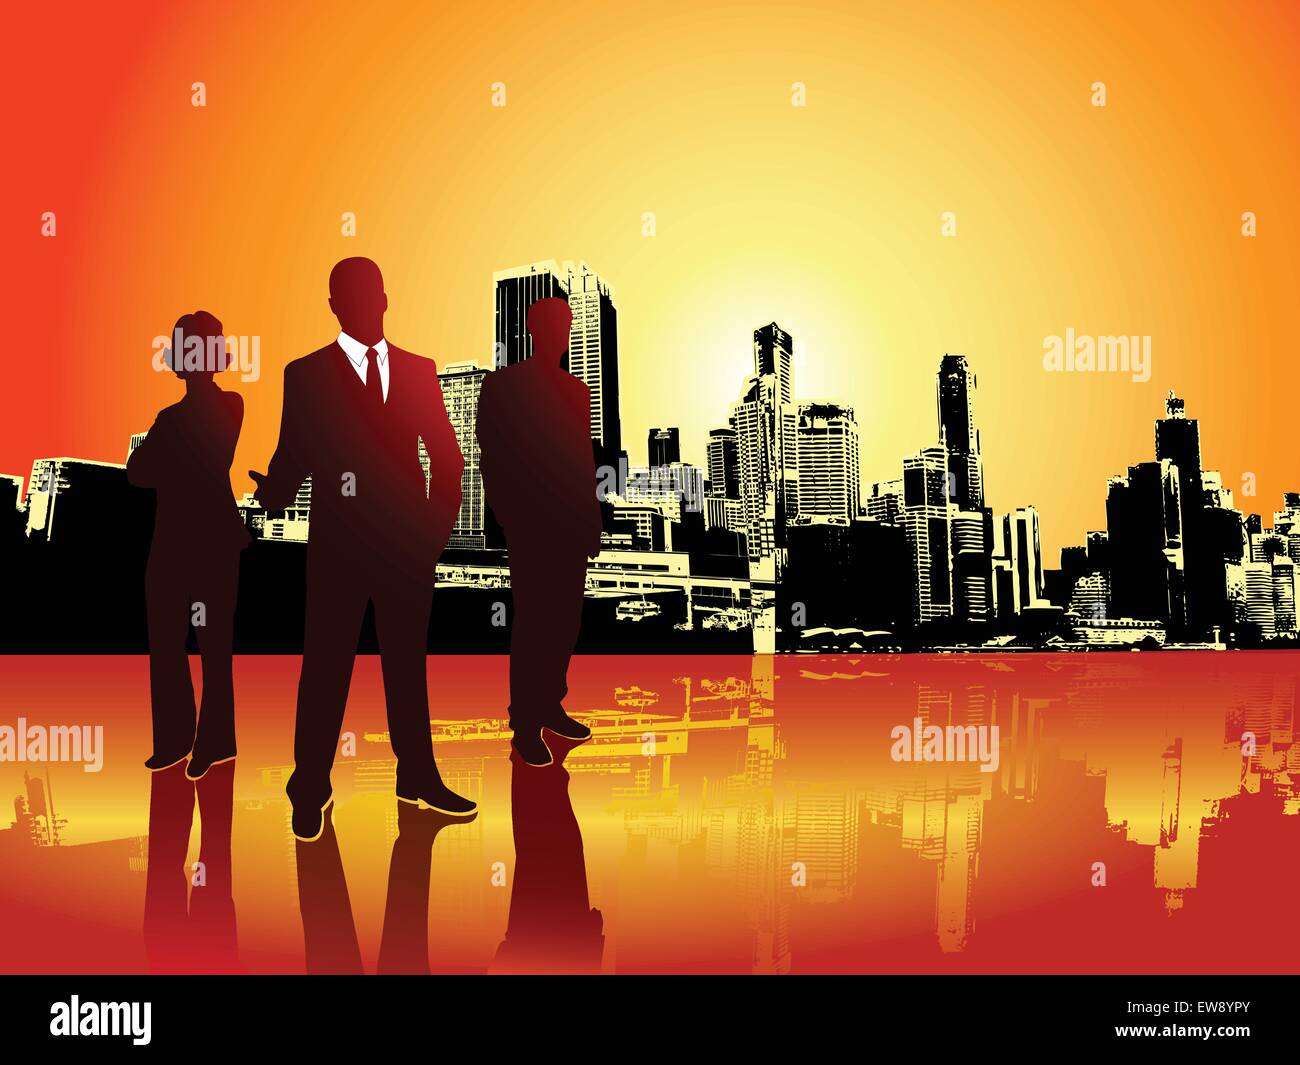 A team of professional businessman and businesswoman in front of a raising sun over a city, in silhouette. Orange and red warm sky. Stock Vector